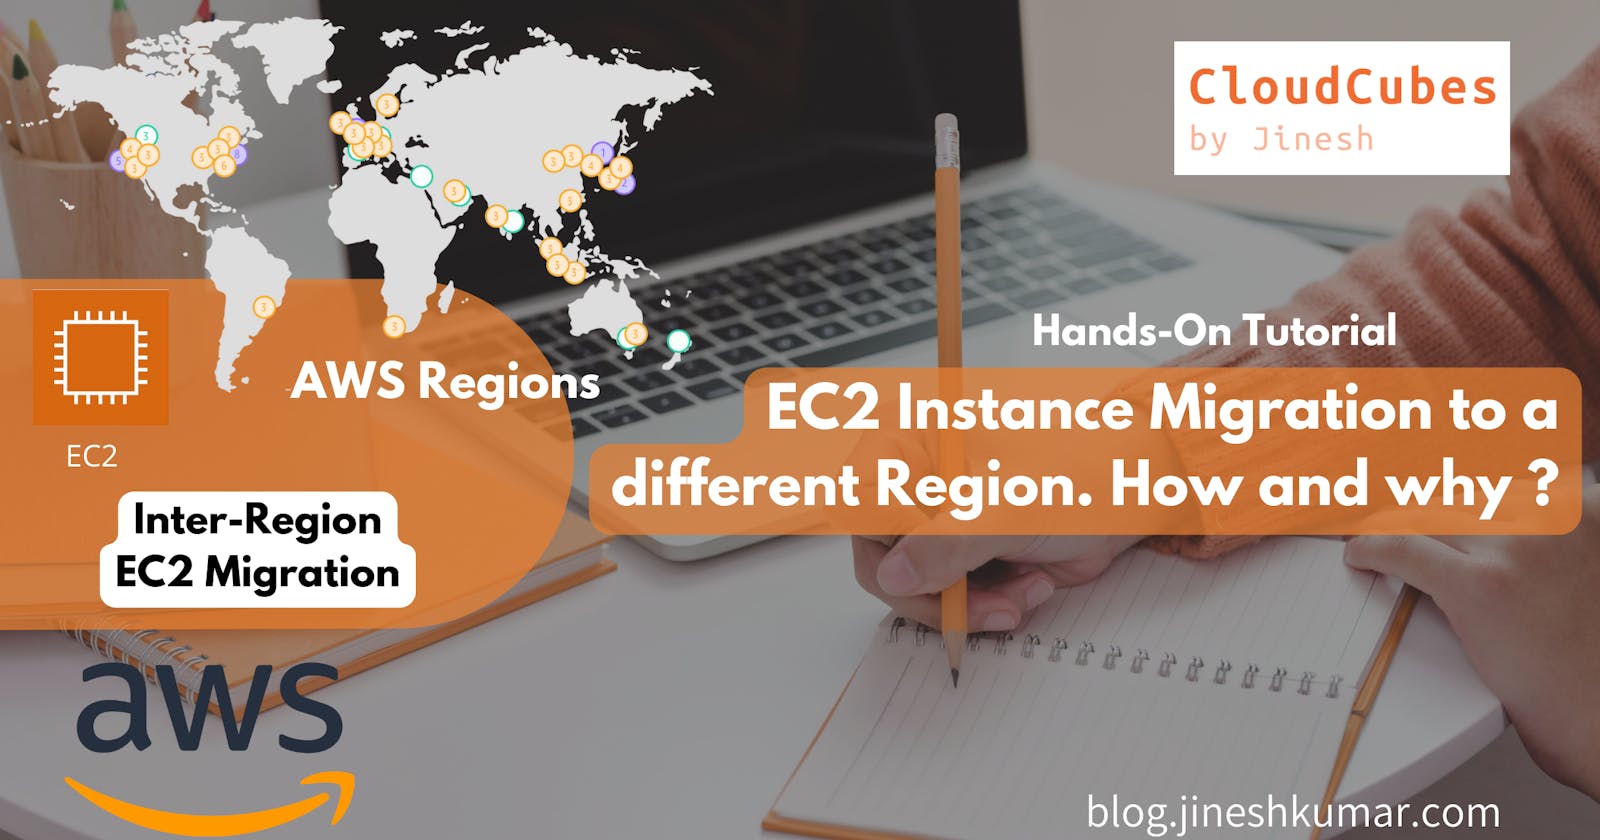 EC2 Instance Migration to a different Region. How and why ?